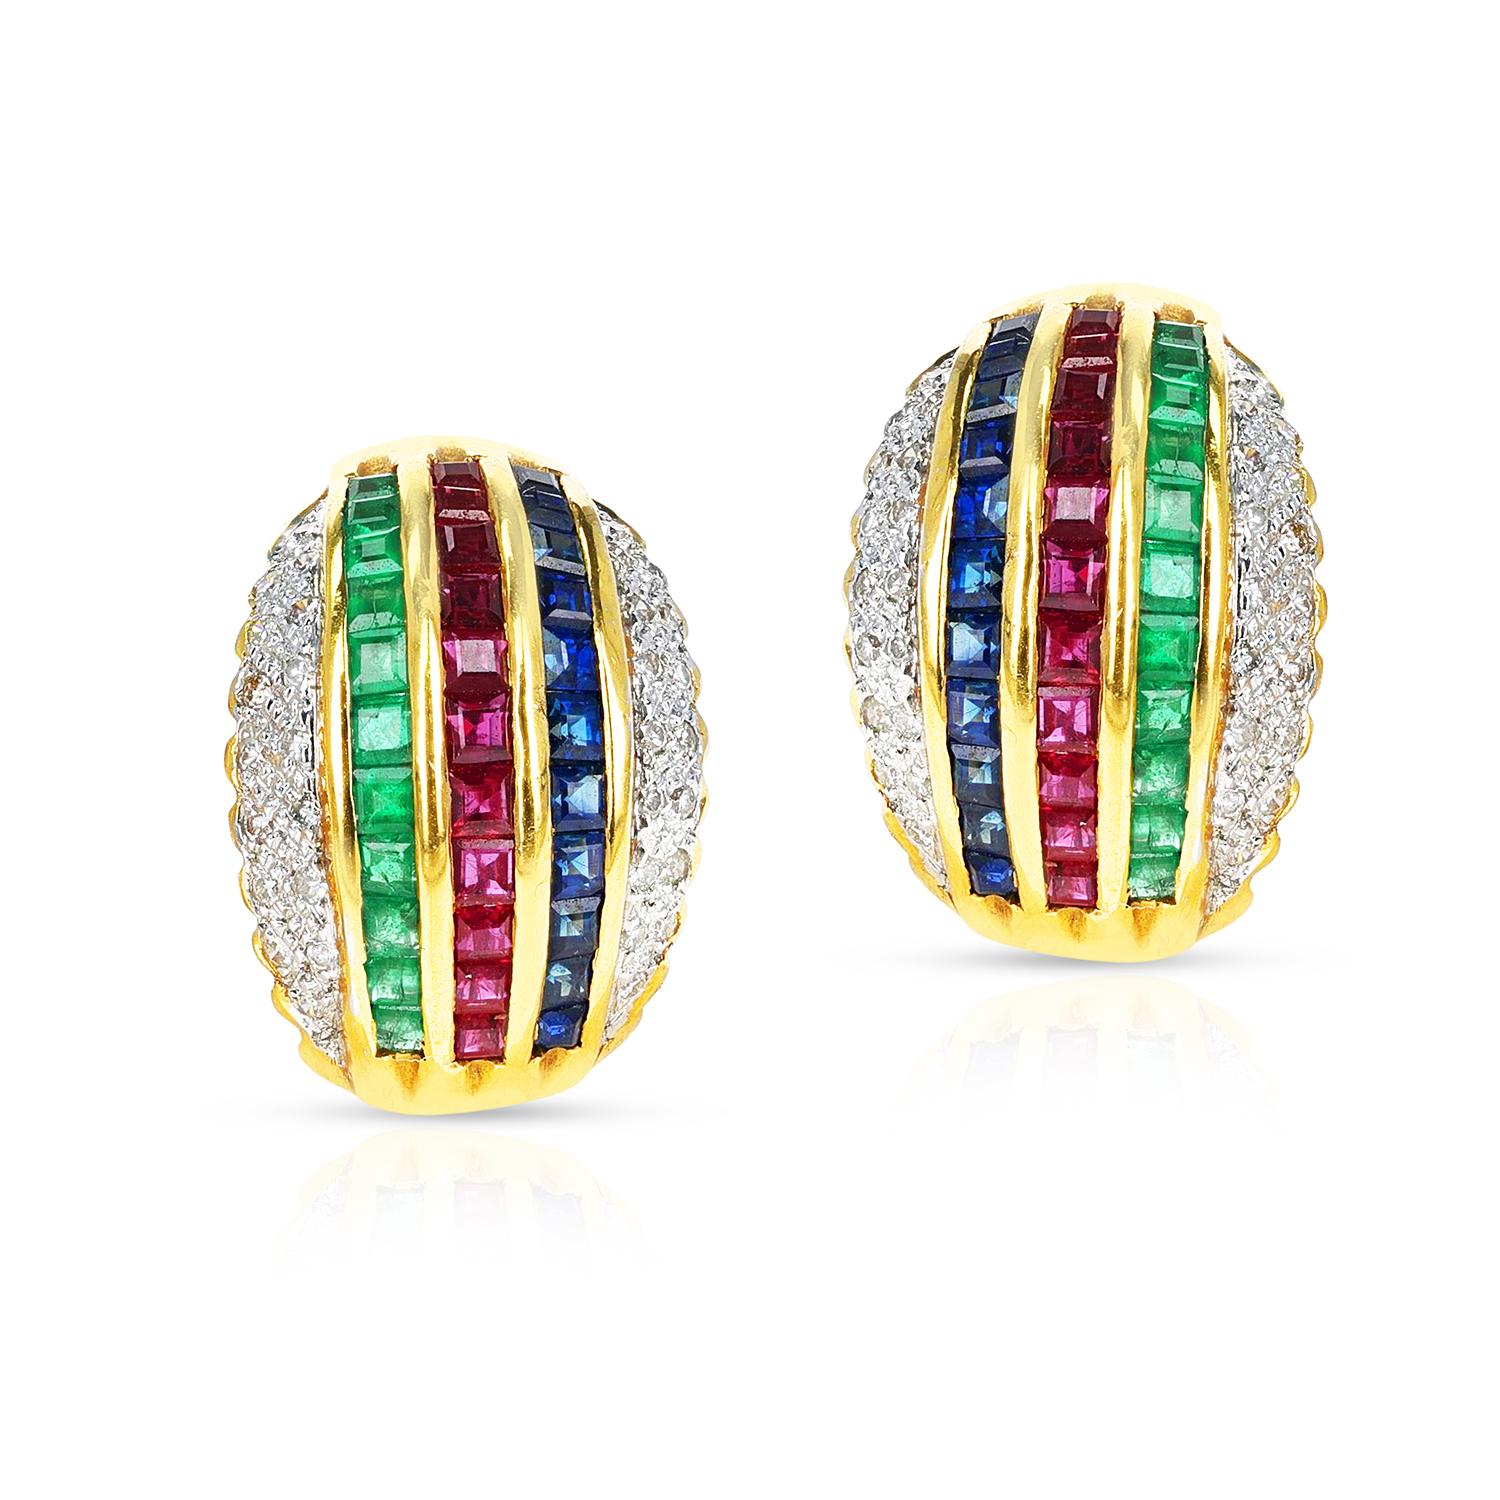 A pair of Ruby, Emerald, Sapphire, and Diamond Earrings made in 18k Yellow Gold. The earrings has a matching ring that is part of the set. The total weight of the earring is 12.99 grams. The length 0.60.